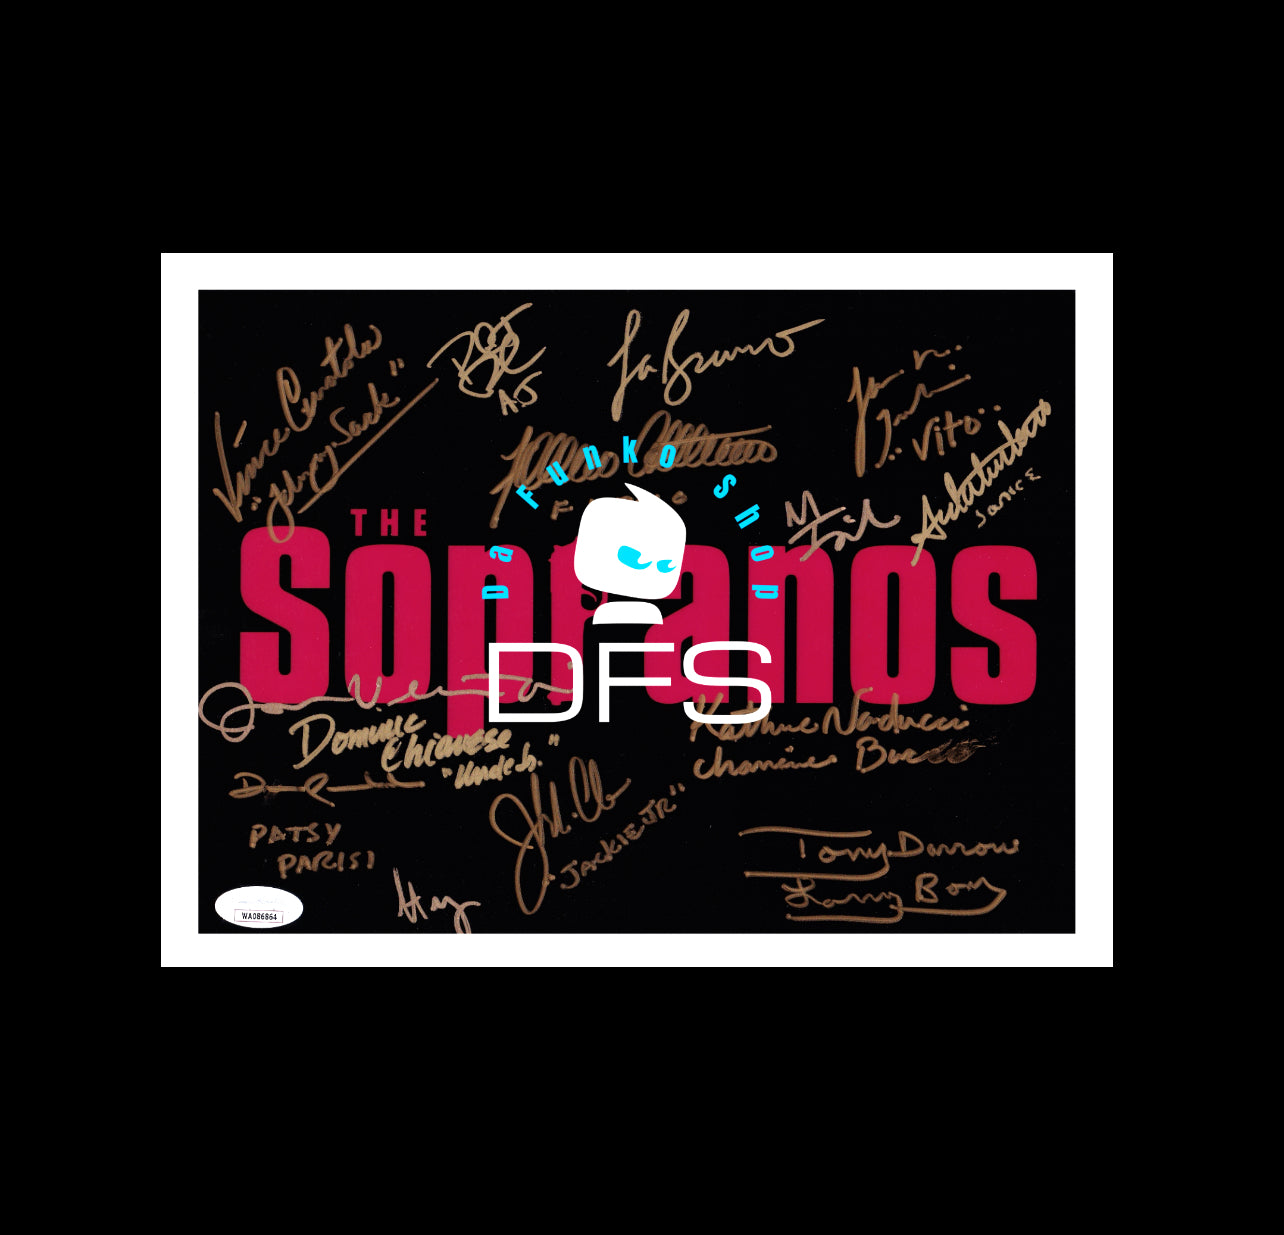 1/1 Rare The Sopranos Framed Authentic Autographed Photograph 8x10 - Picture is Signed by 14 Sopranos Cast Members Signatures are Authenticated By JSA ✅ - DaFunkoShop - Photograph